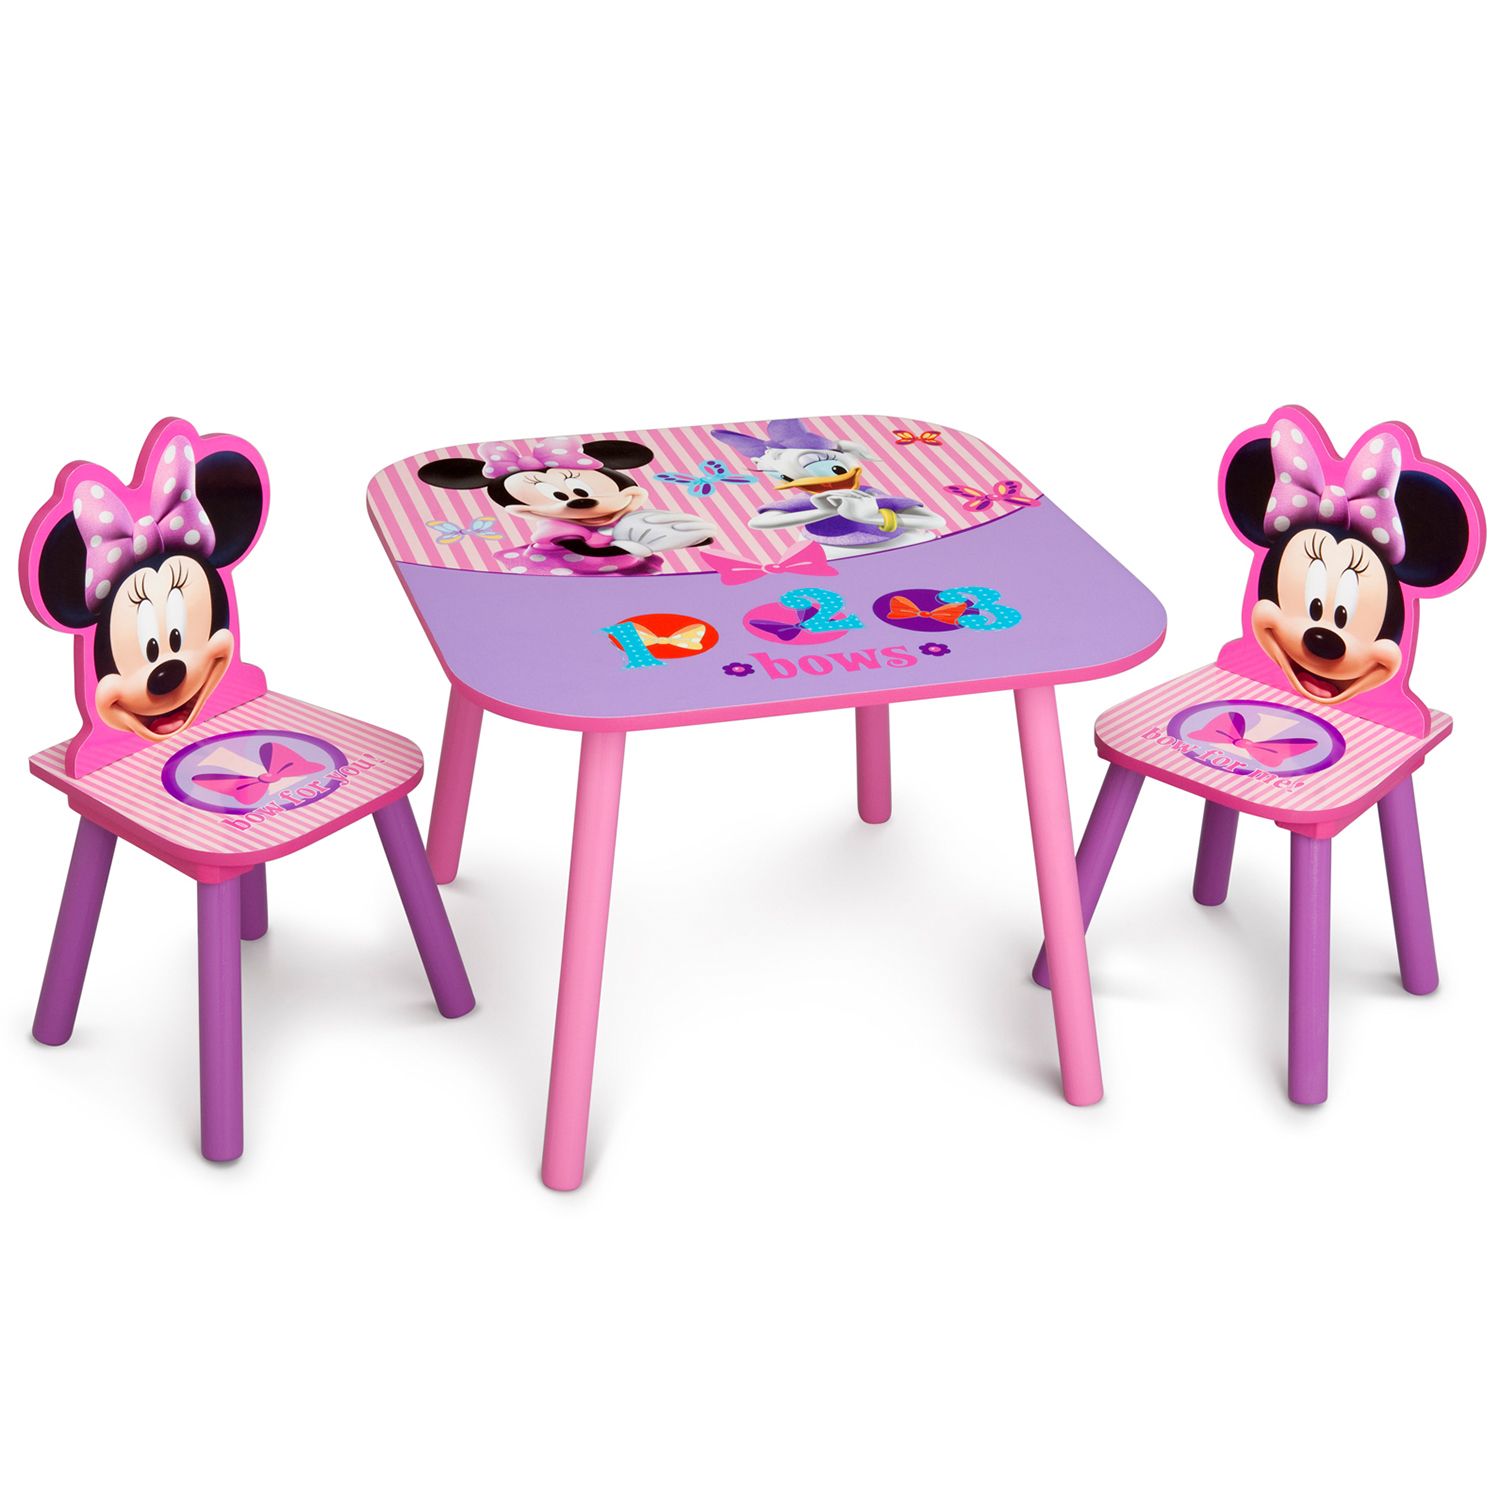 minnie mouse folding table and chairs